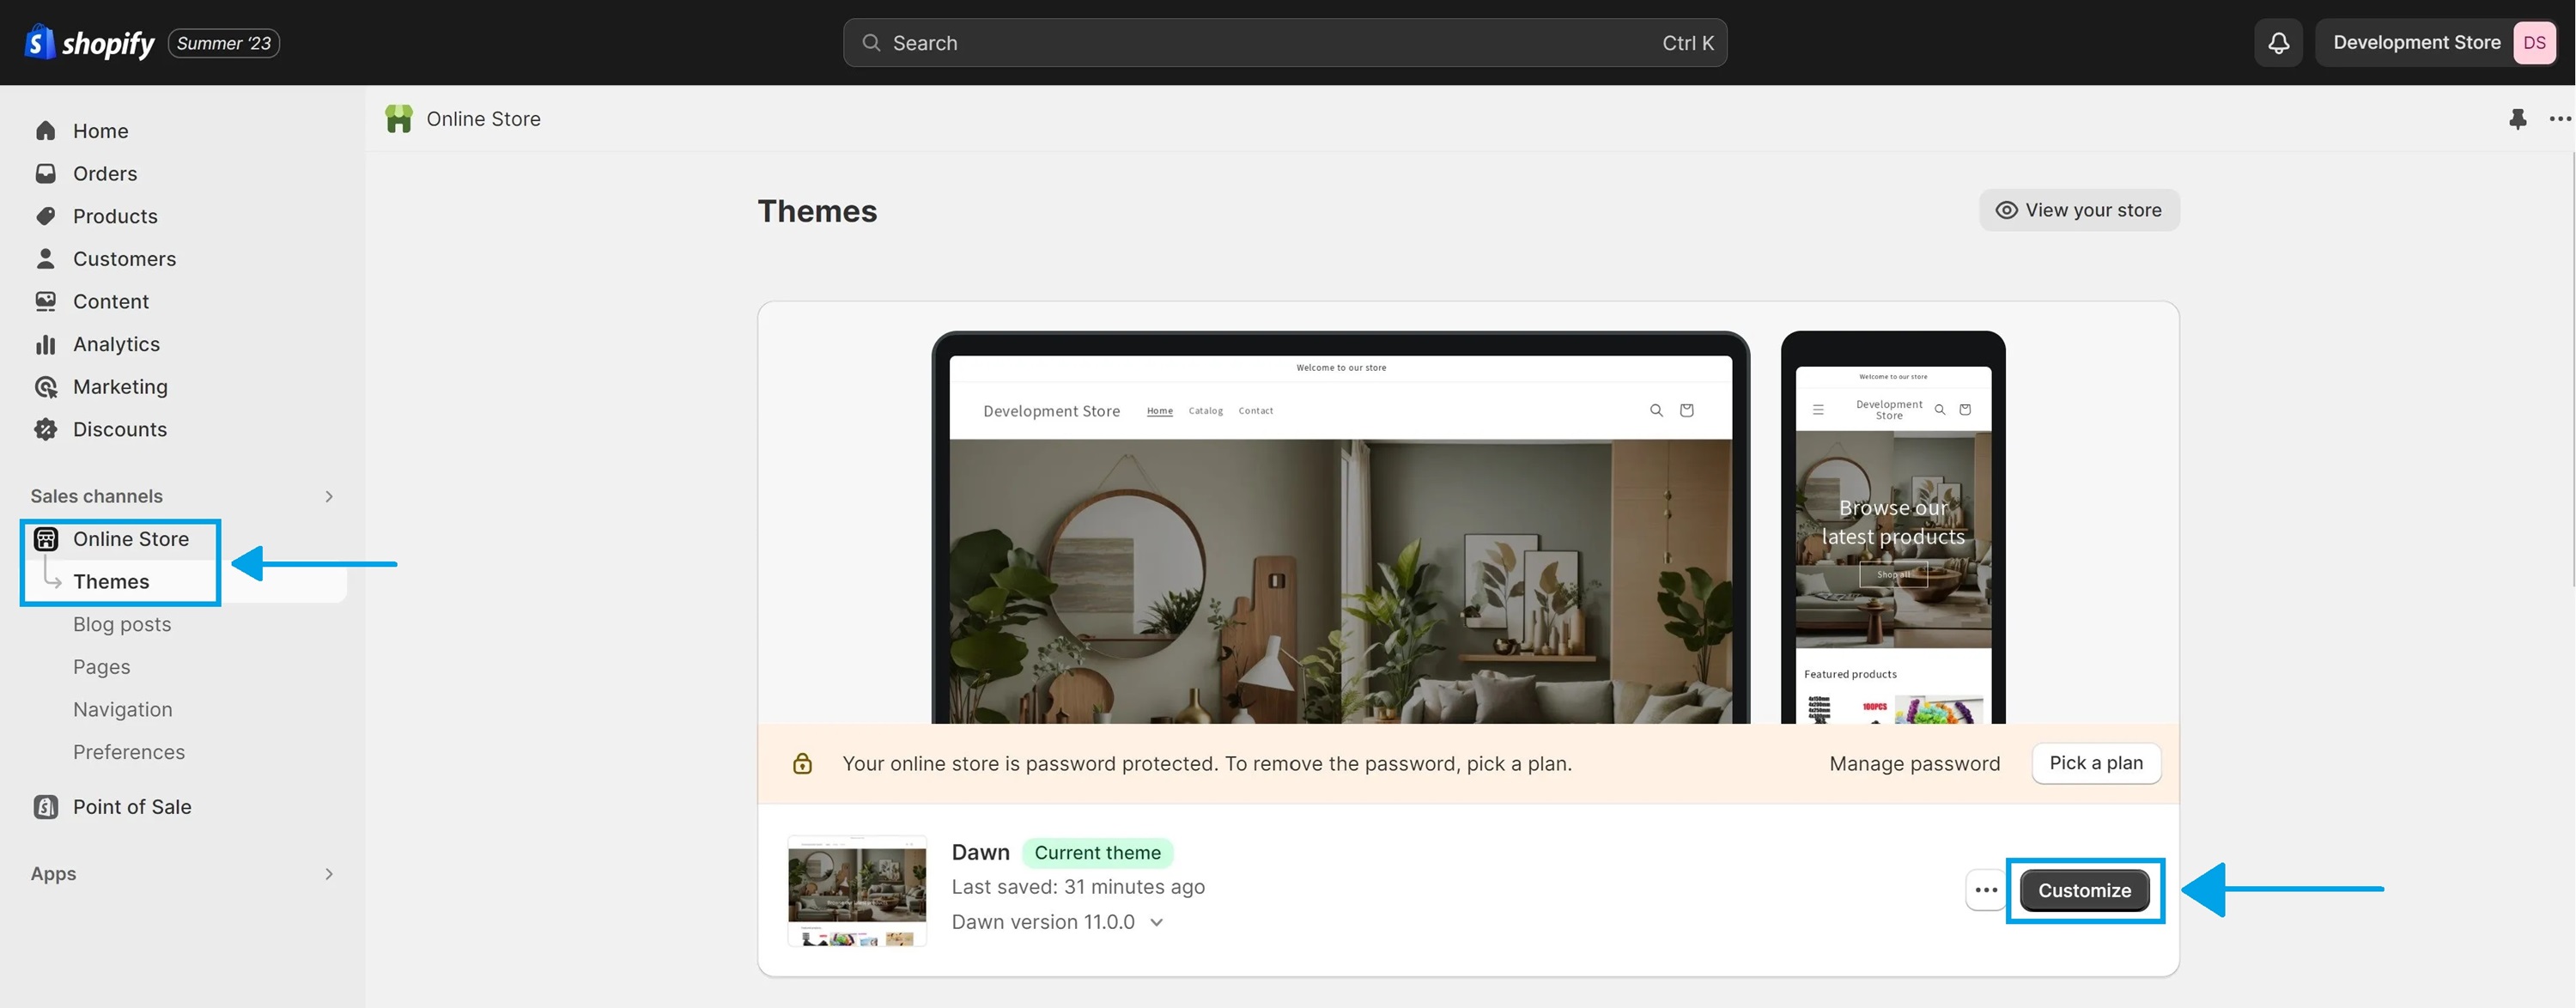 KeepShoppers screenshot: Customizing Shopify theme to change featured collection display